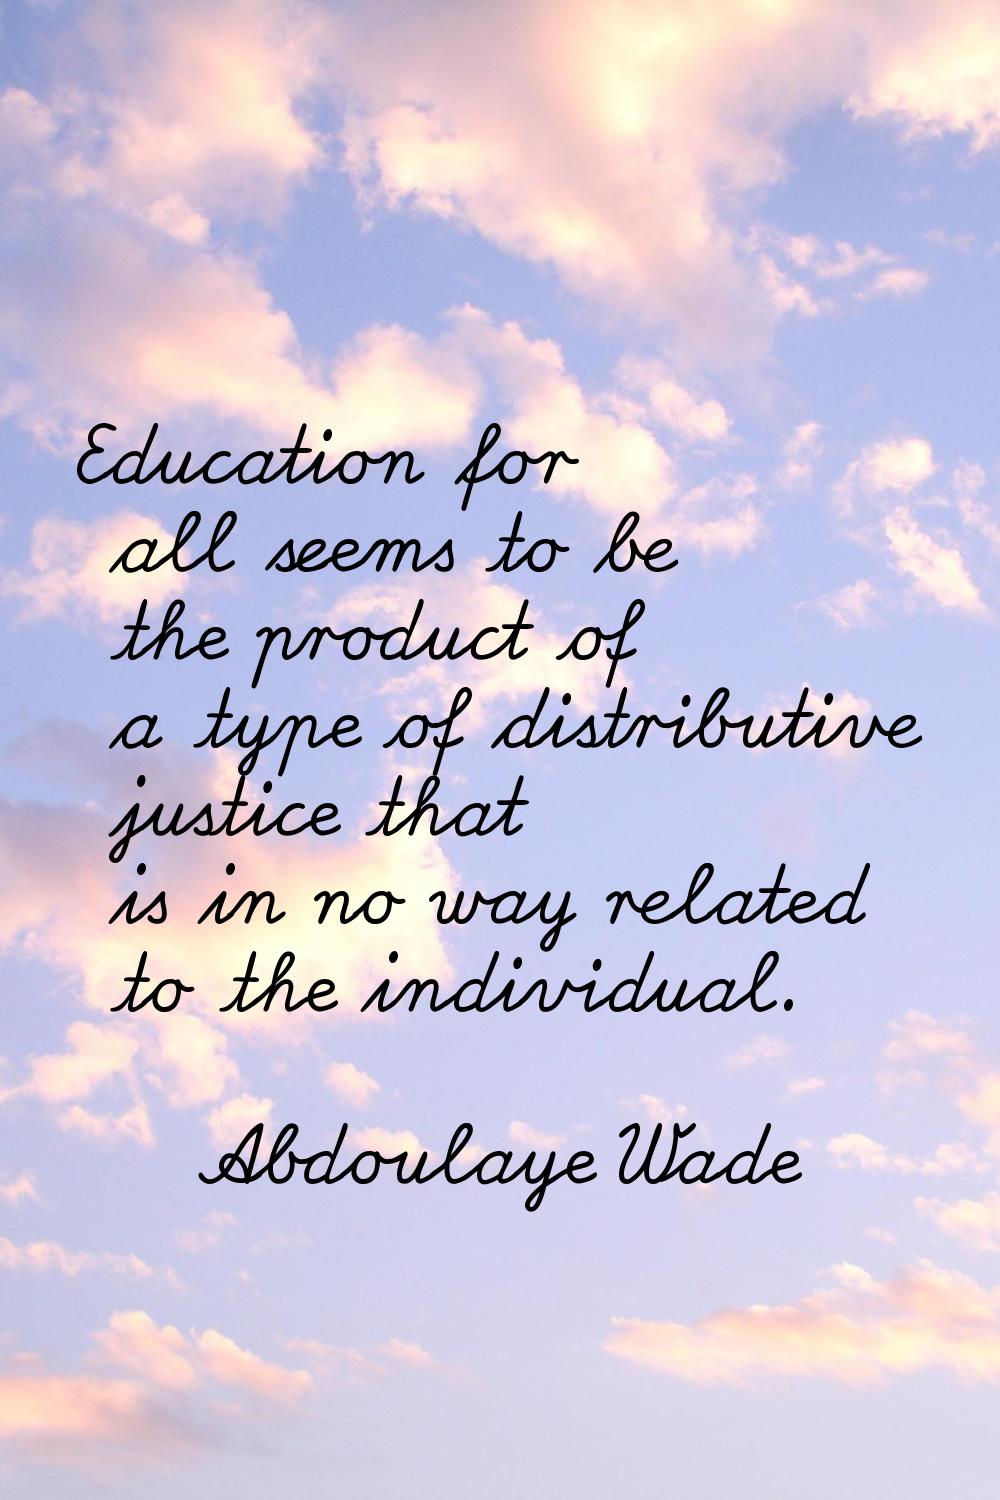 Education for all seems to be the product of a type of distributive justice that is in no way relat